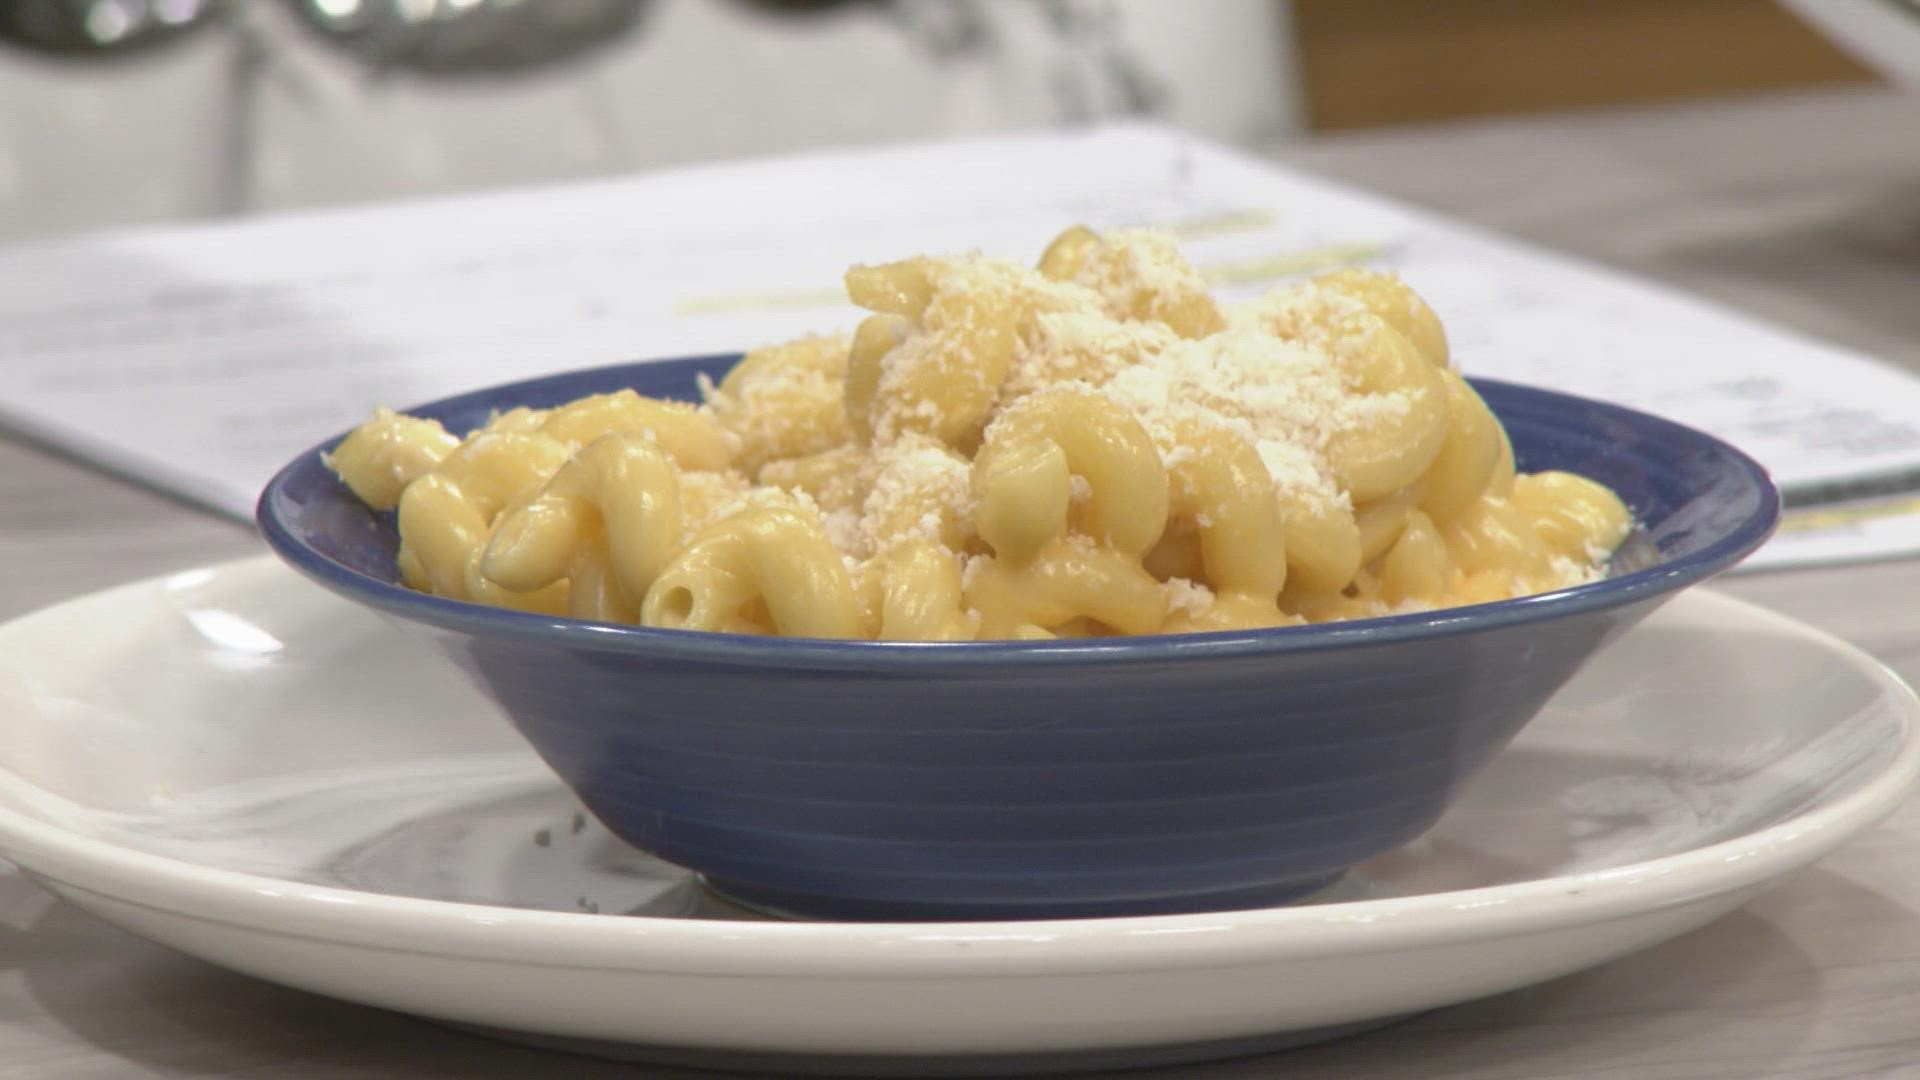 Brandon Lassiter from Proof BBQ visits us with some delicious mac and cheese.